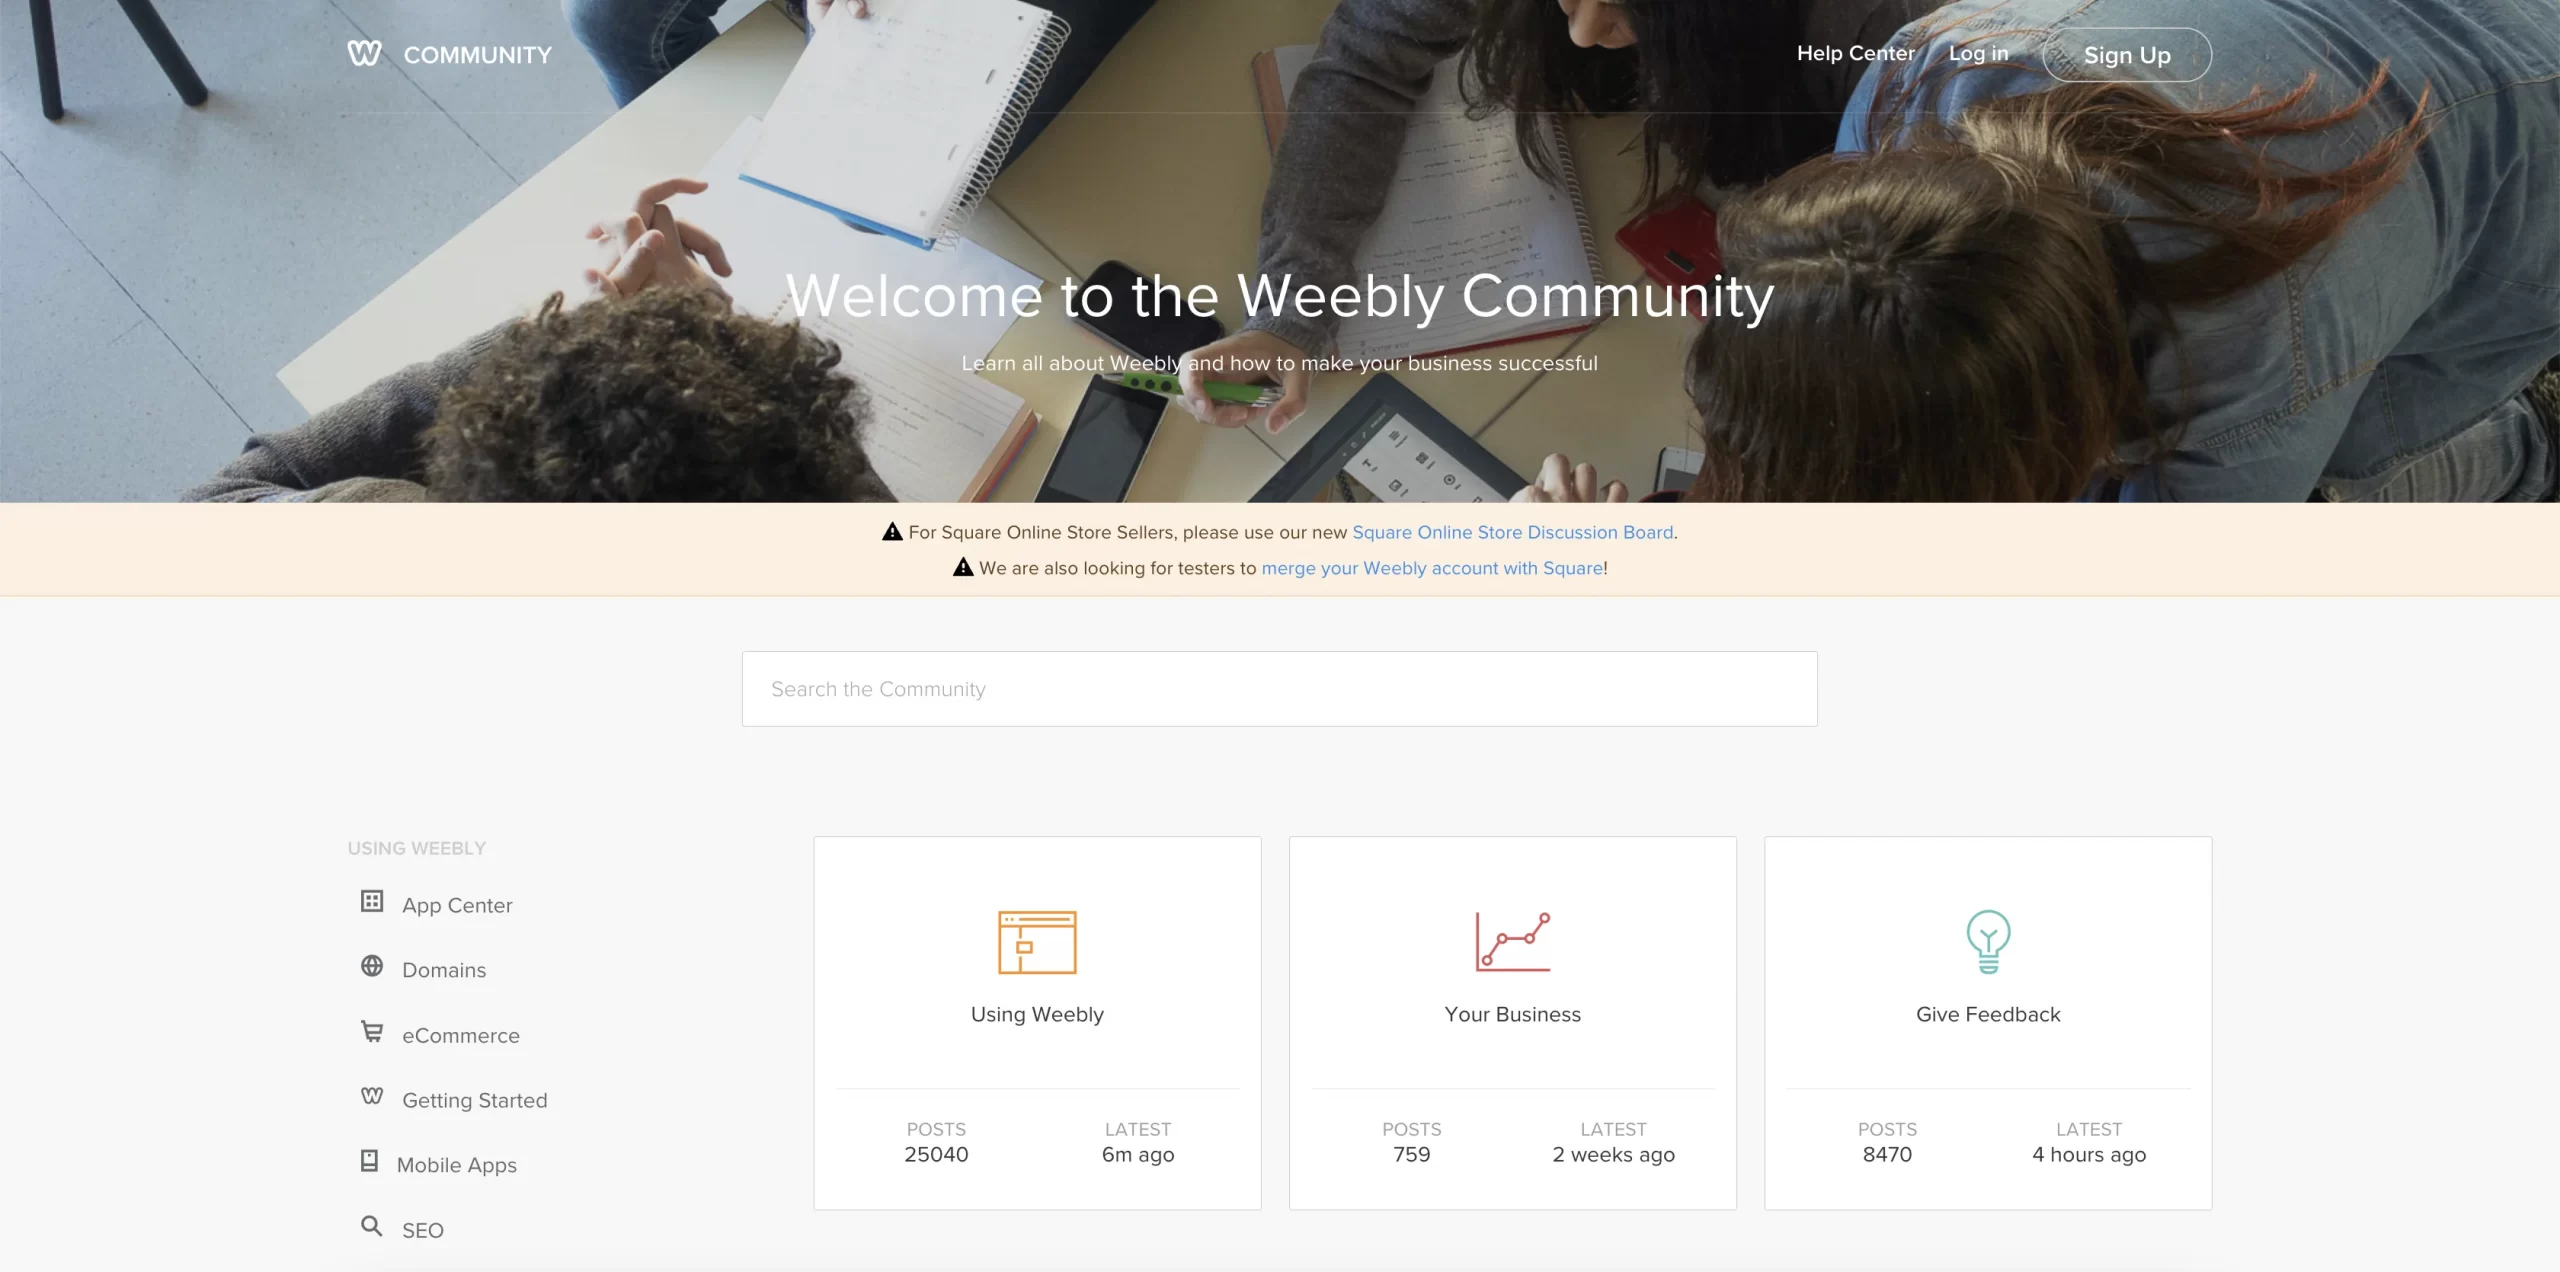 Weebly Community